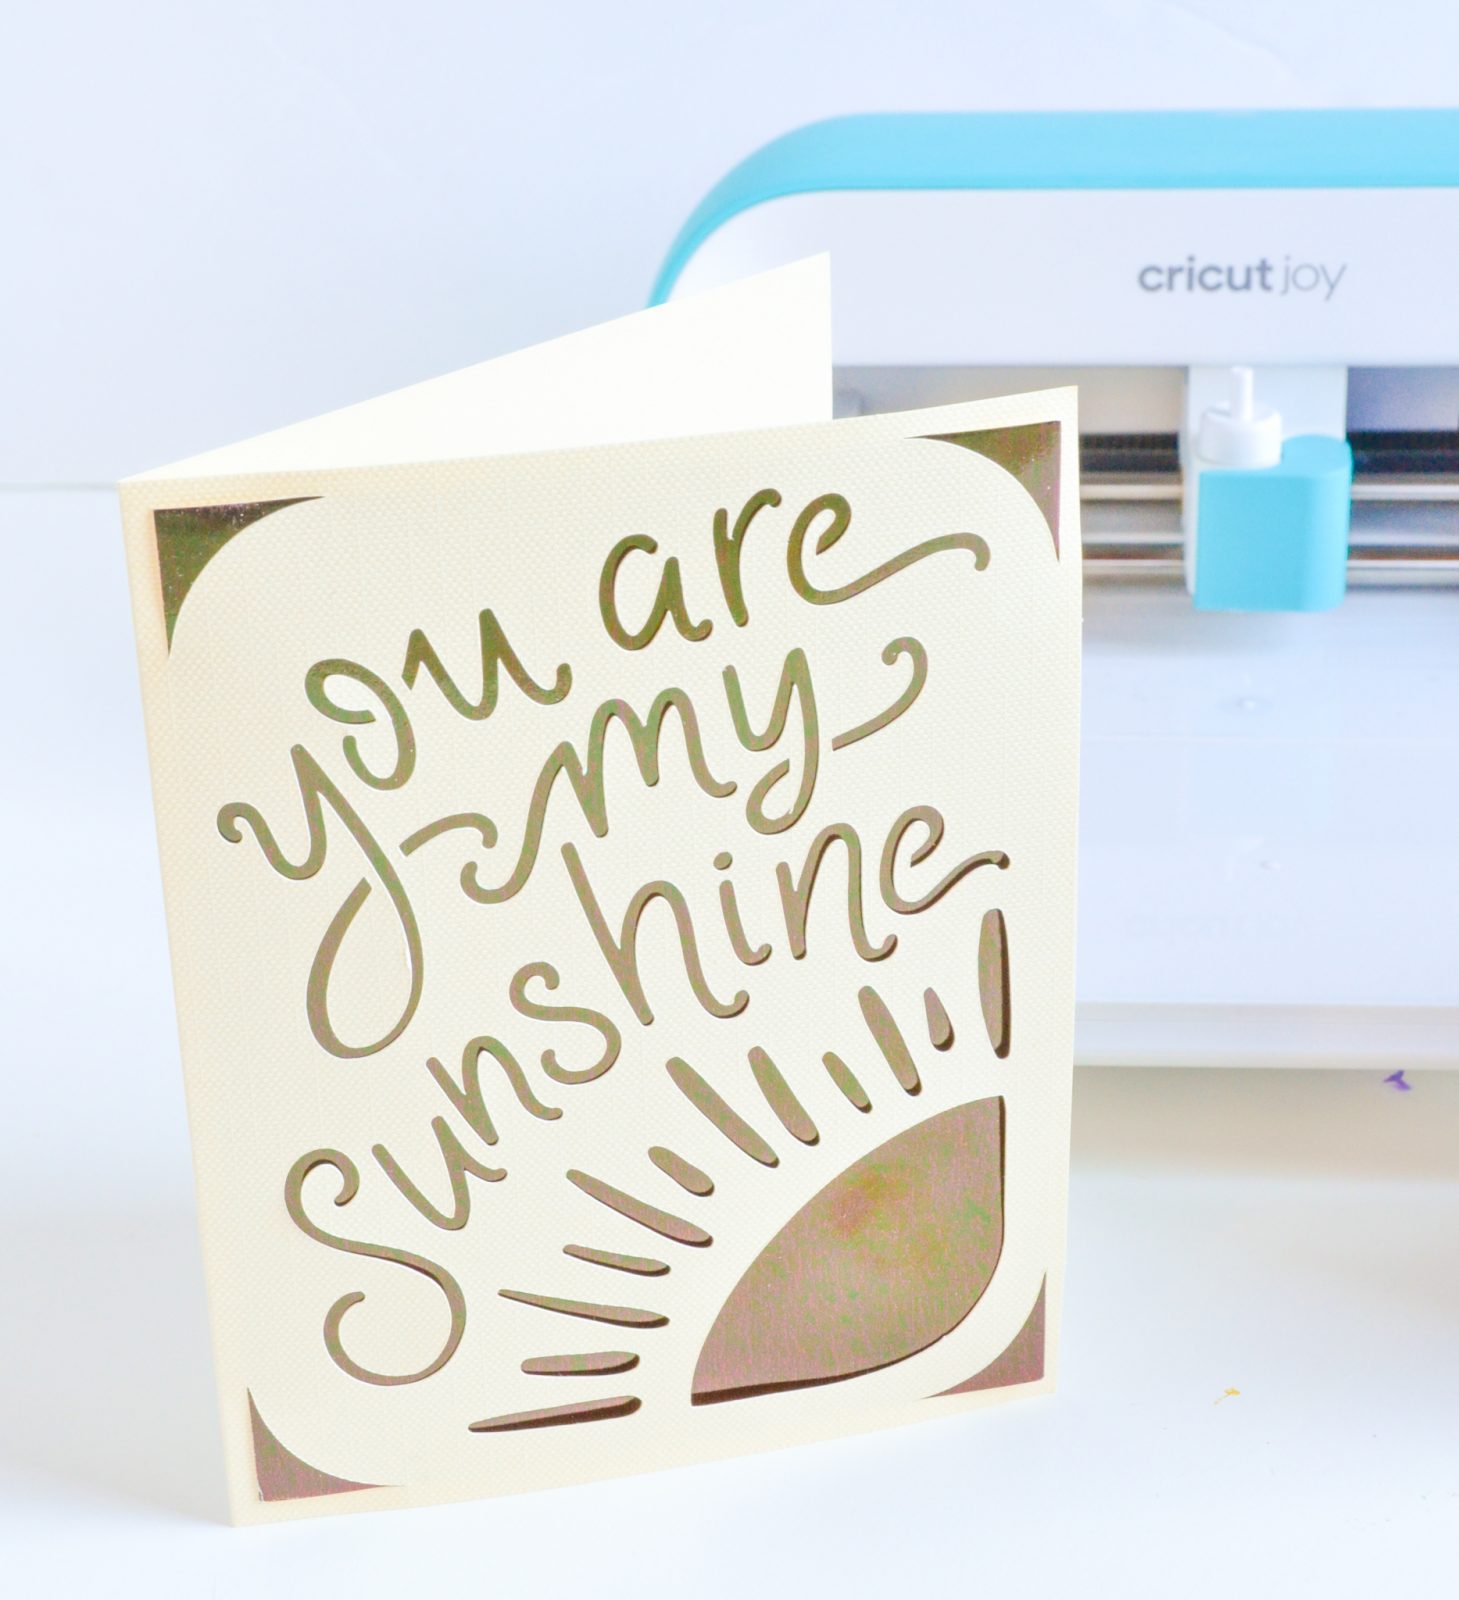 Cricut EasyPress 2 Questions ANSWERED - Over The Big Moon